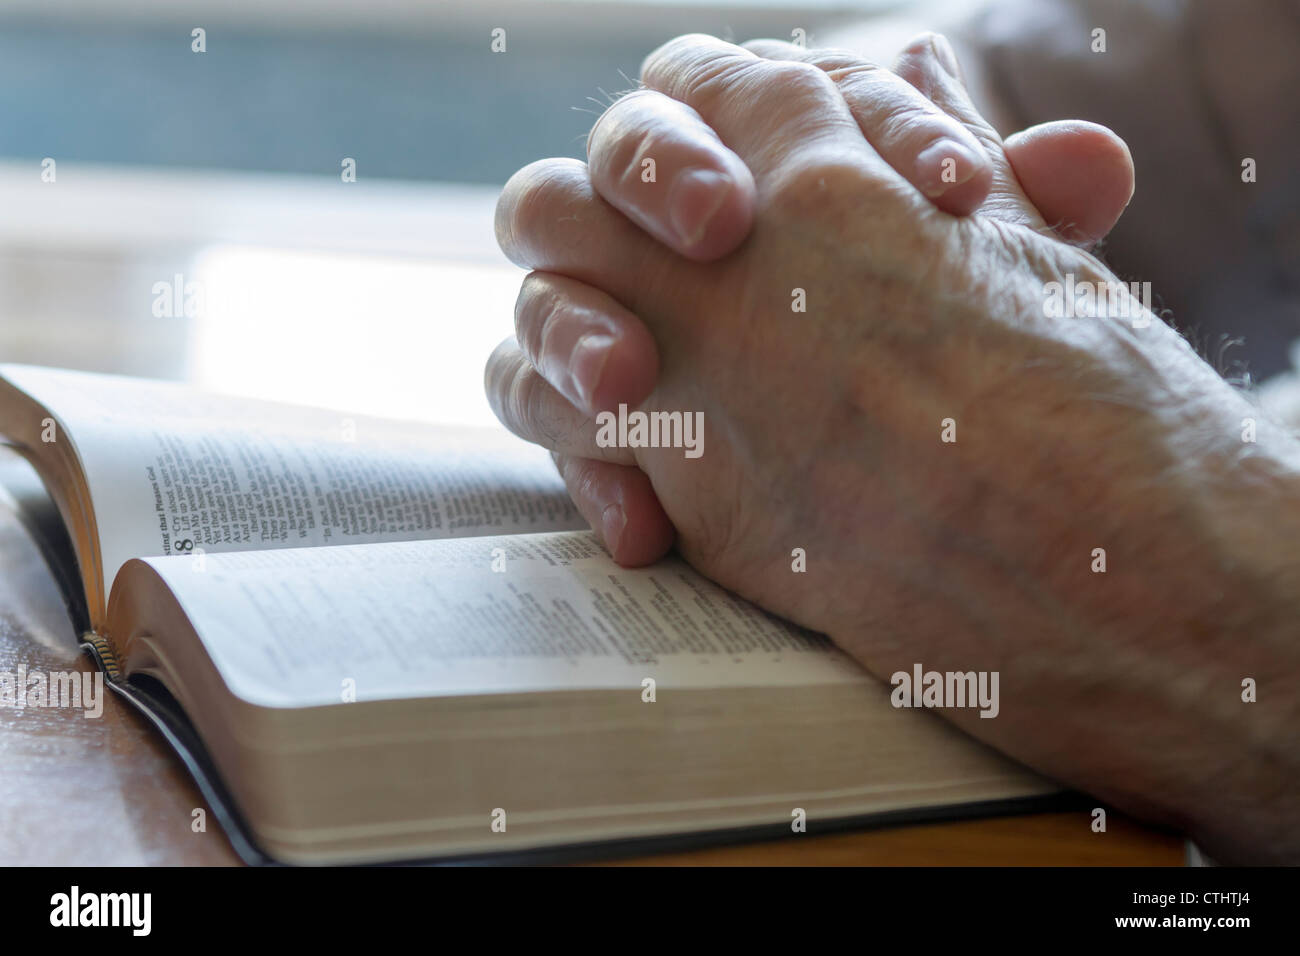 weathered old man's hands clasped in prayer over open Bible Stock Photo